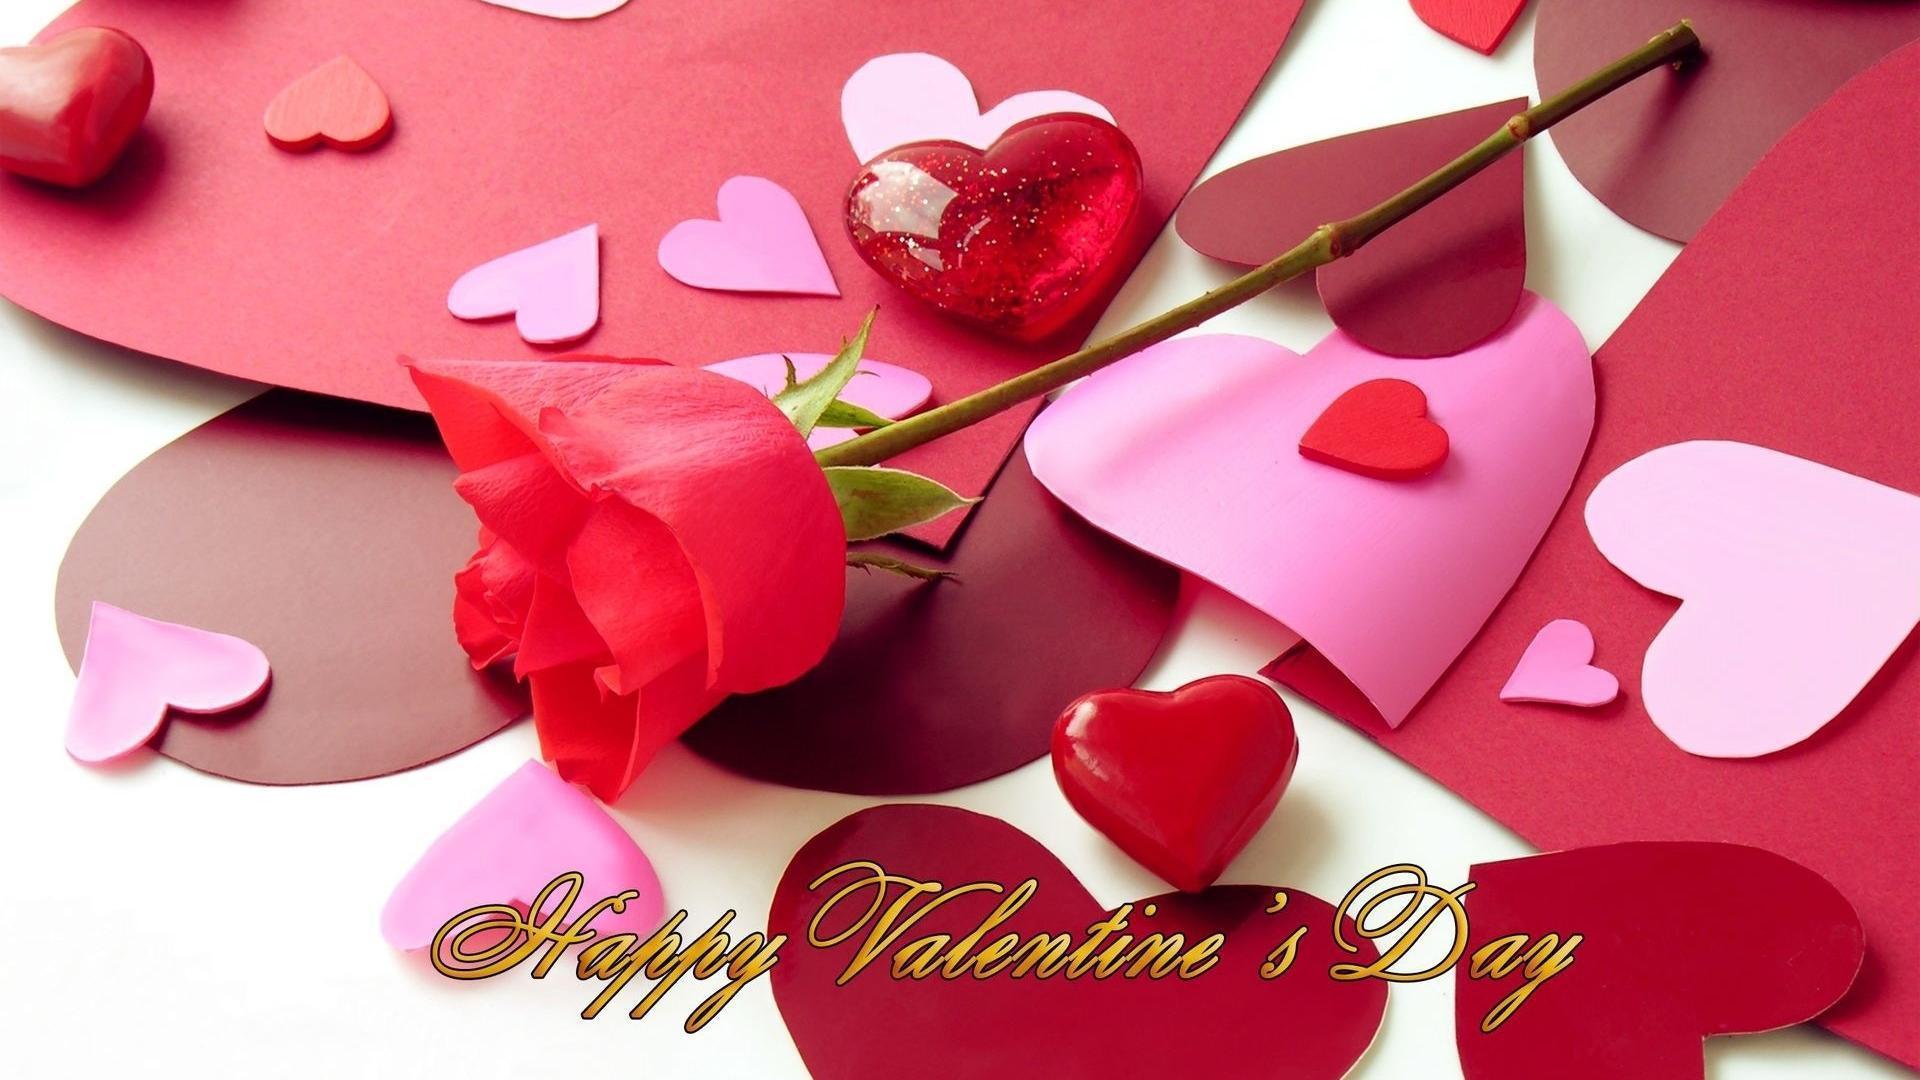 List of the 7 Days Celebration before Valentine&;s Day 2015